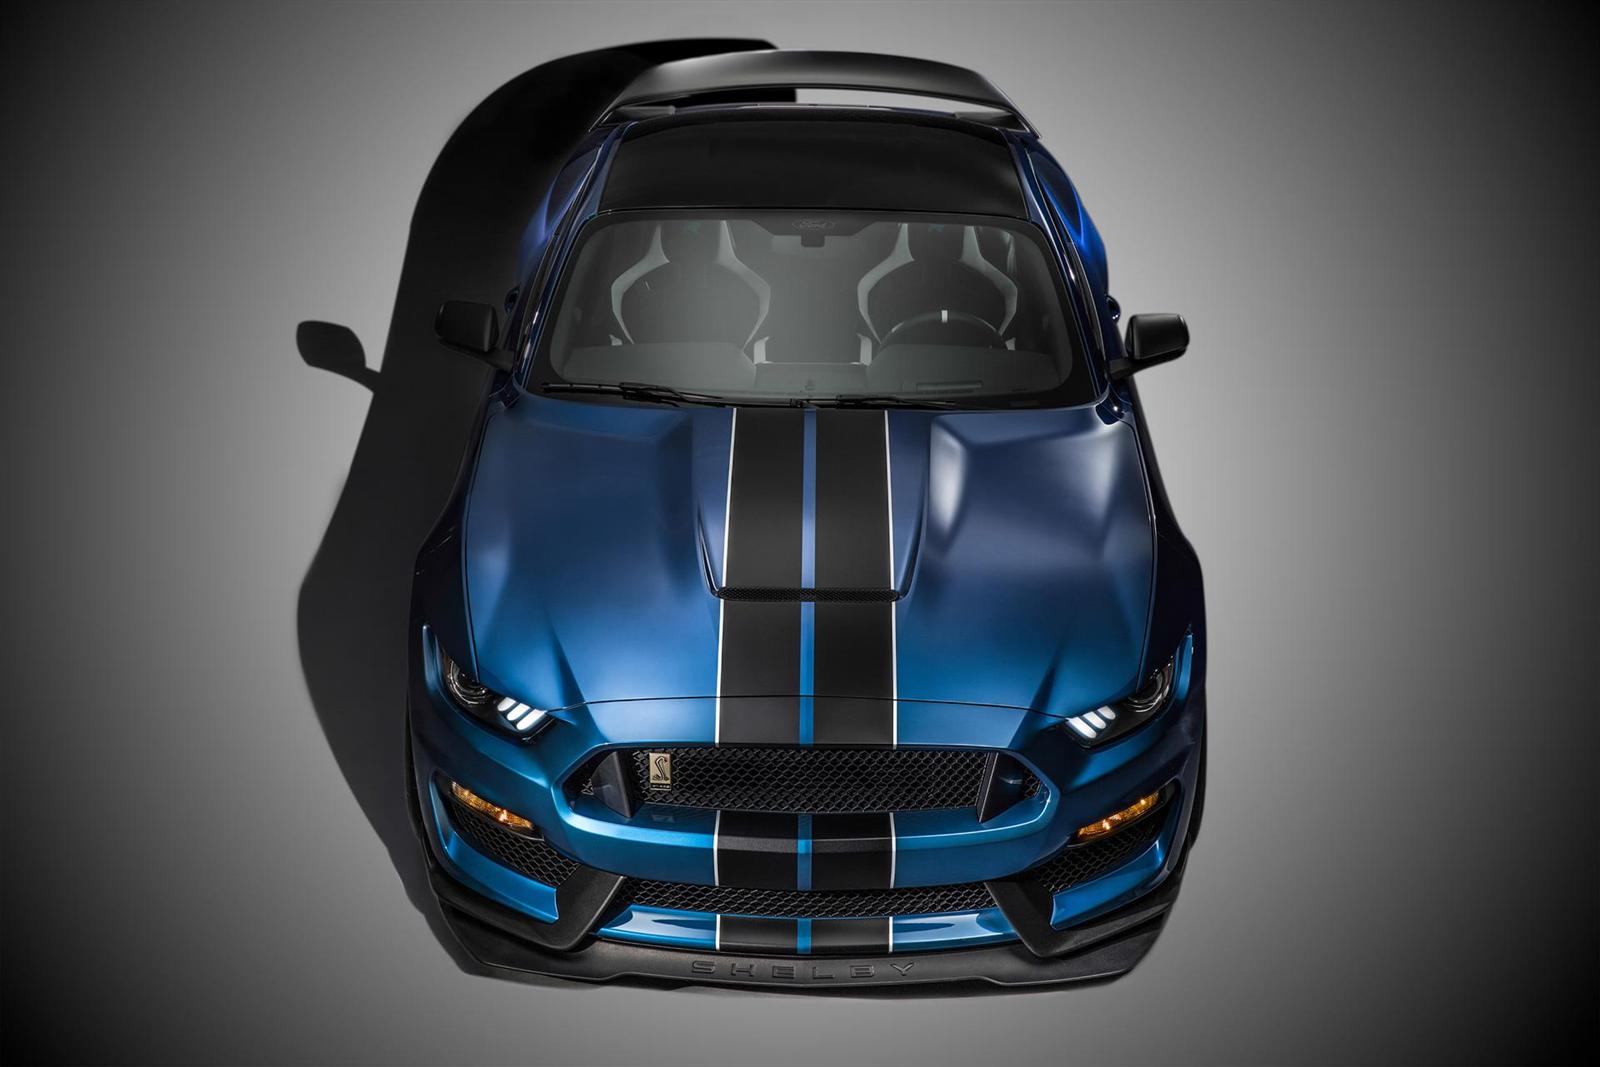 2015 Shelby Mustang GT350R